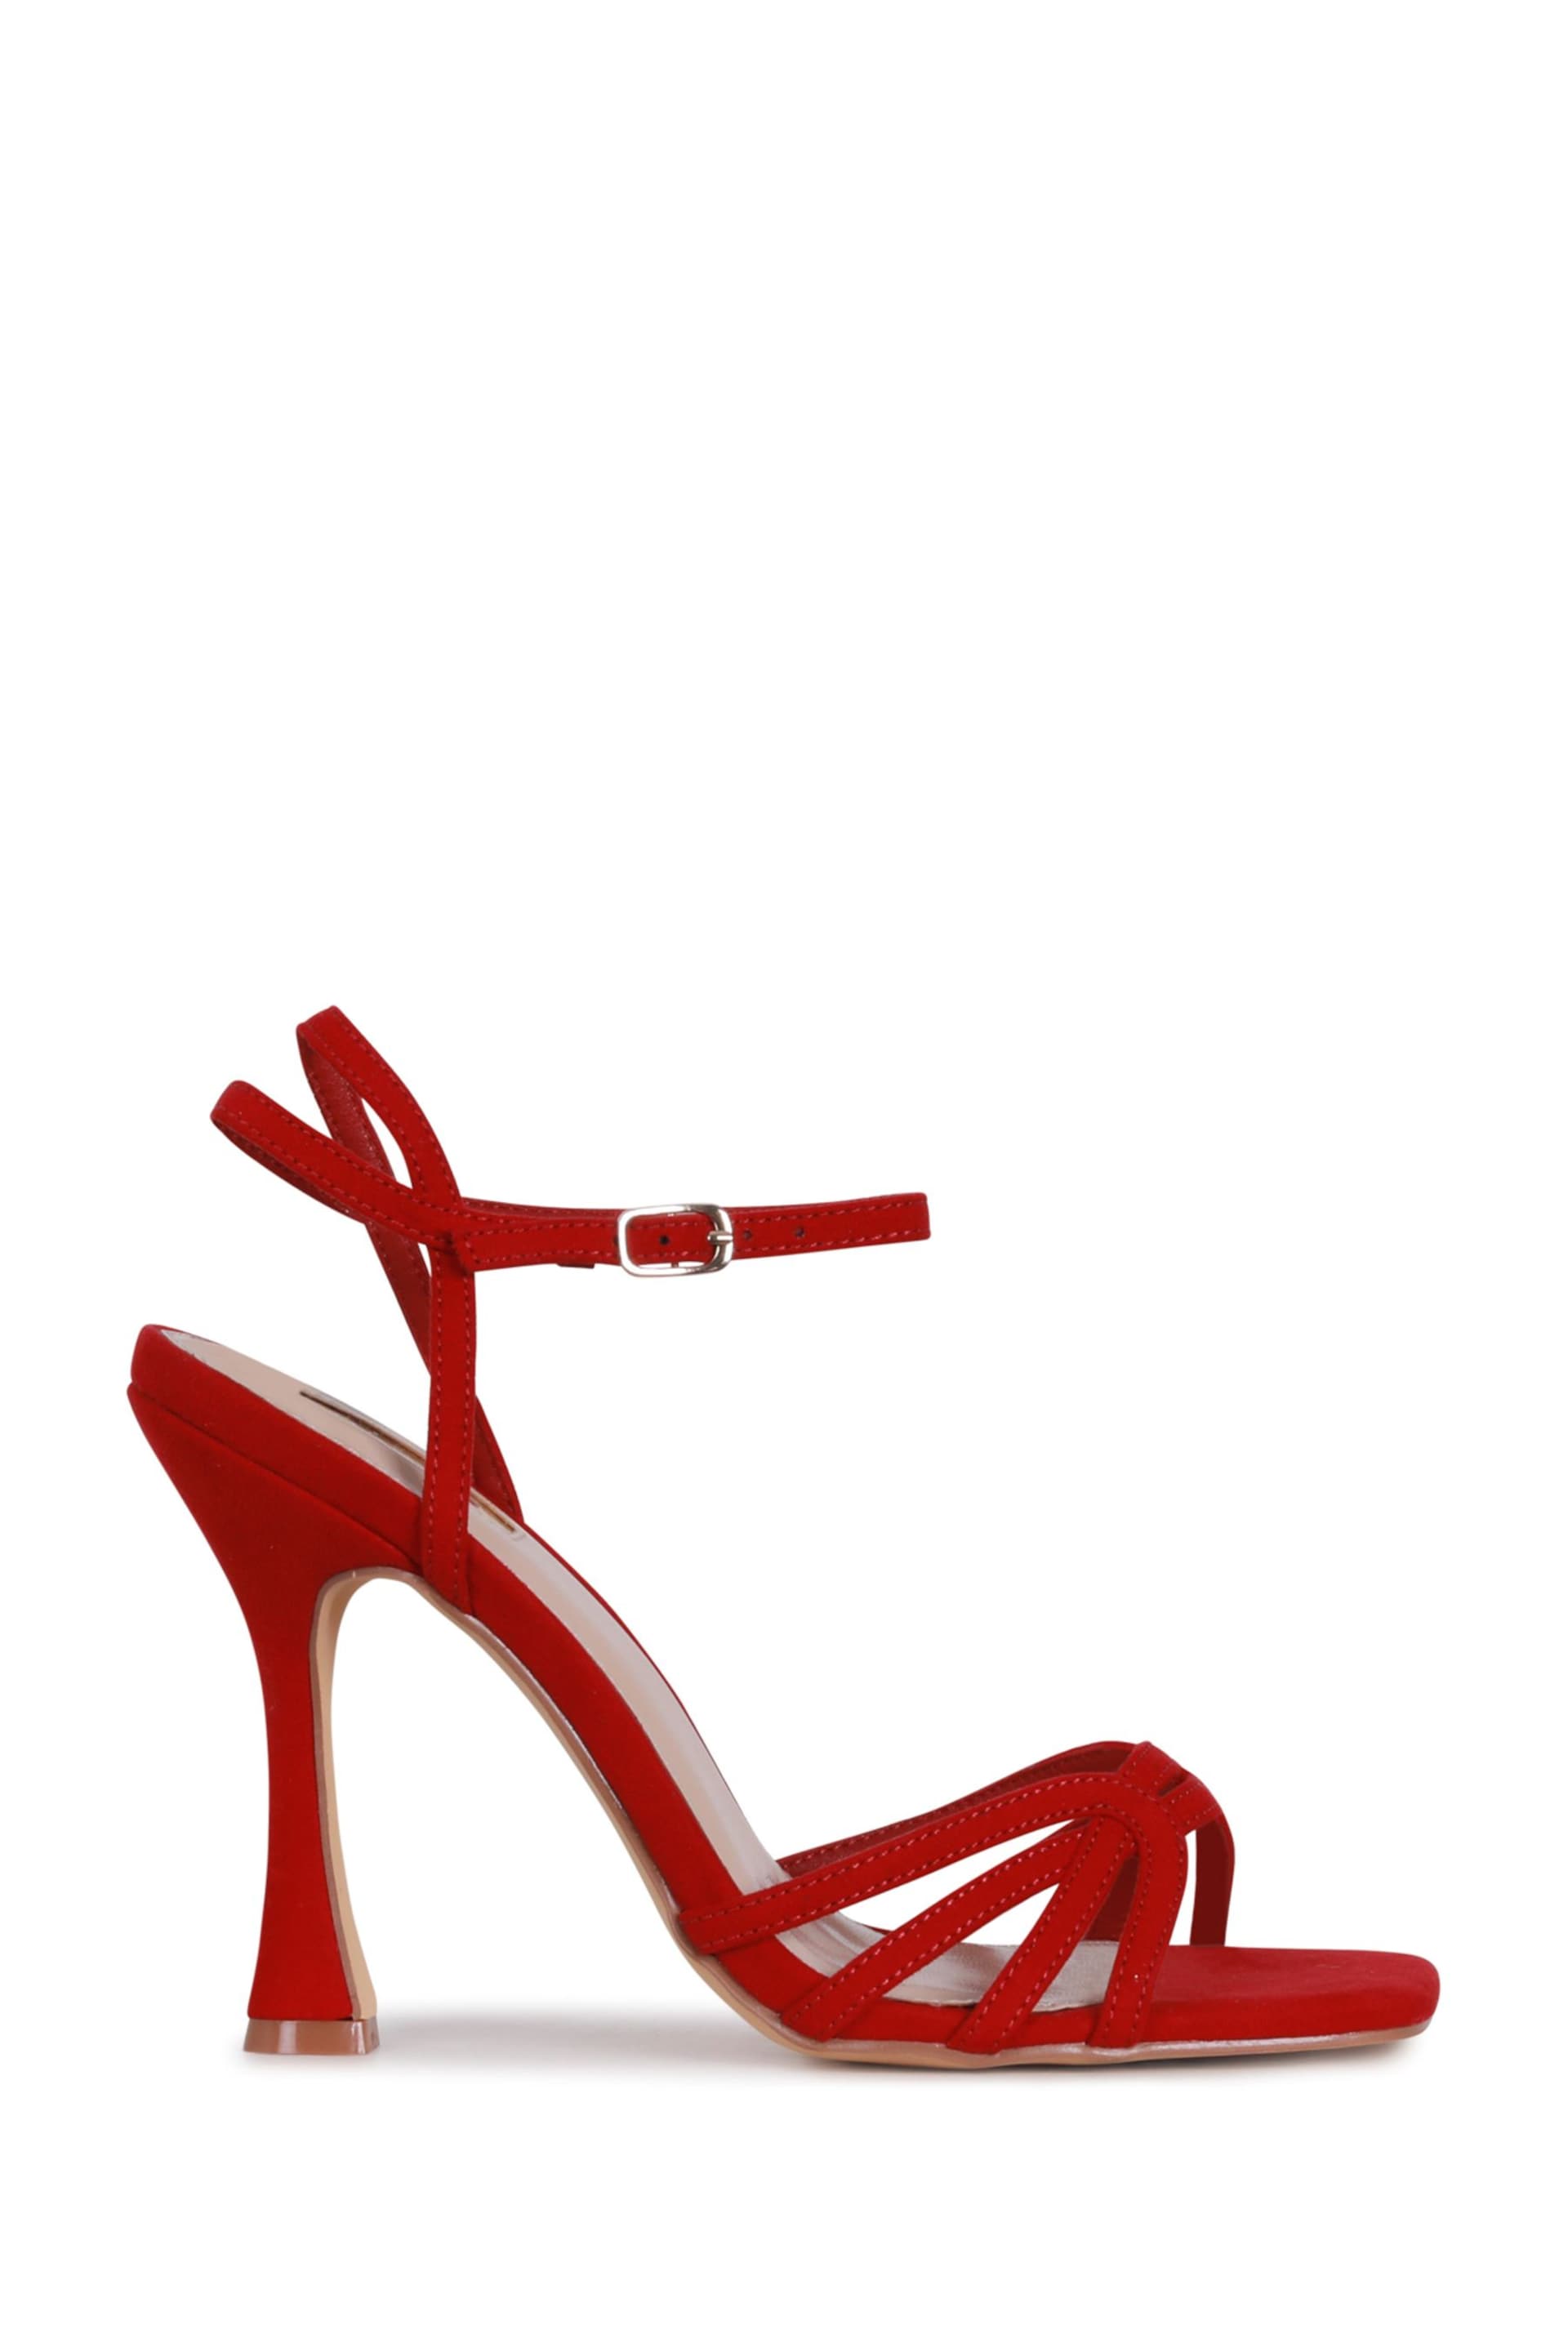 Linzi Red Faux Suede Serena Cut Out Stiletto Heeled Sandal - Image 3 of 5